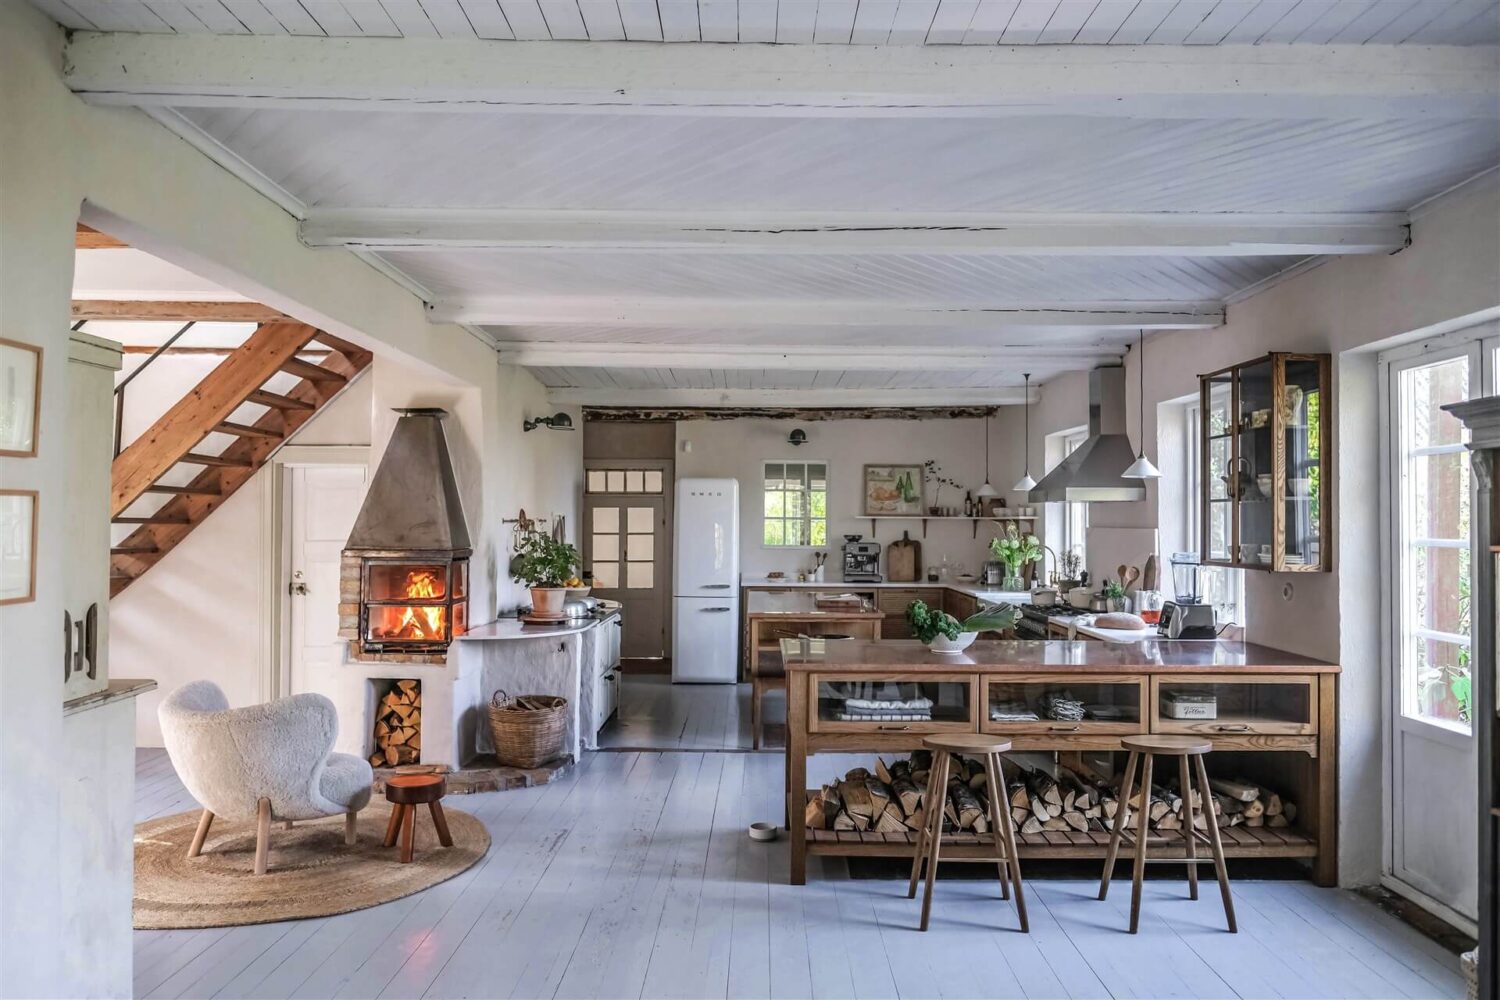 open-plan-kitchen-devol-haberdasher-sitting-room-fireplace-countryside-home-our-food-stories-nordroom